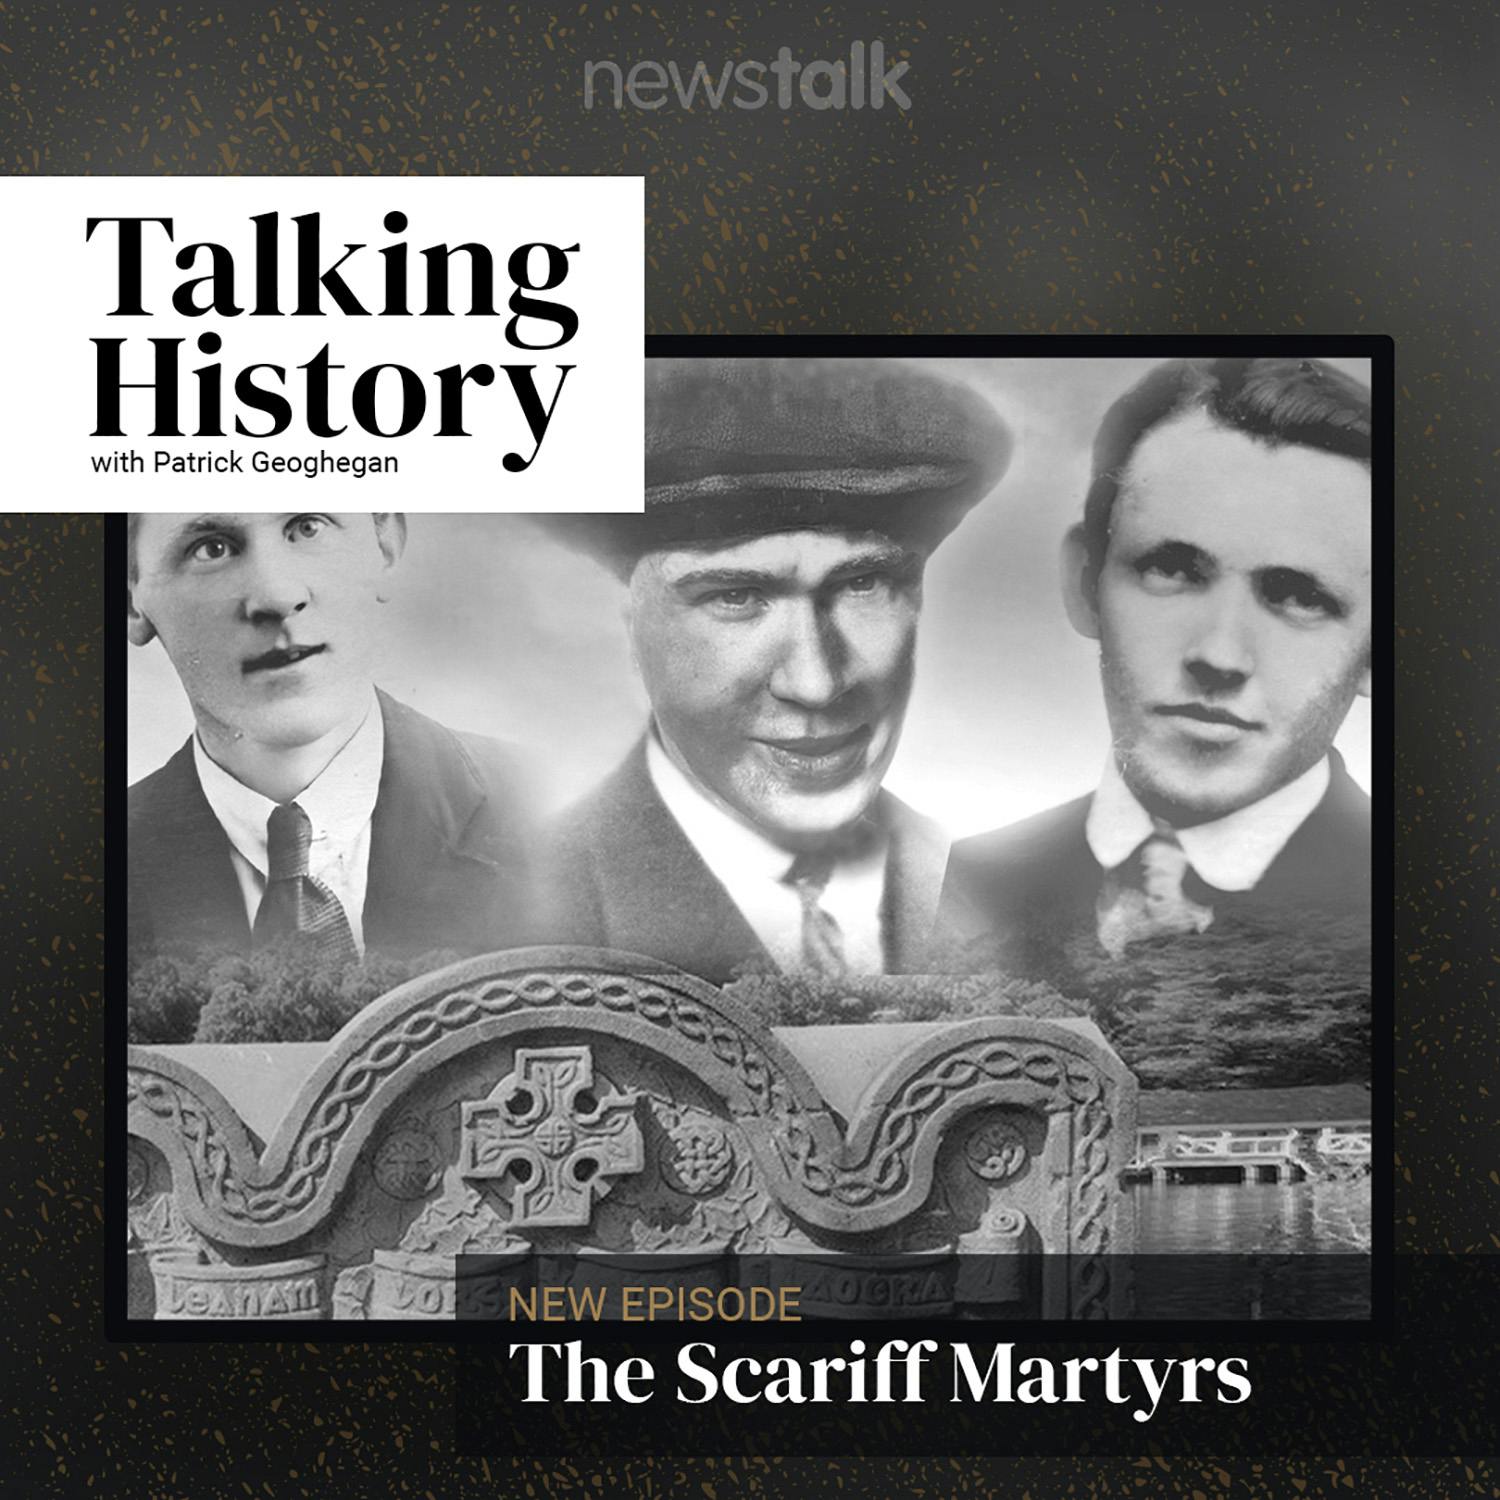 The Scariff Martyrs, Kerry’s Famine Poor and Dublin 1910-1940